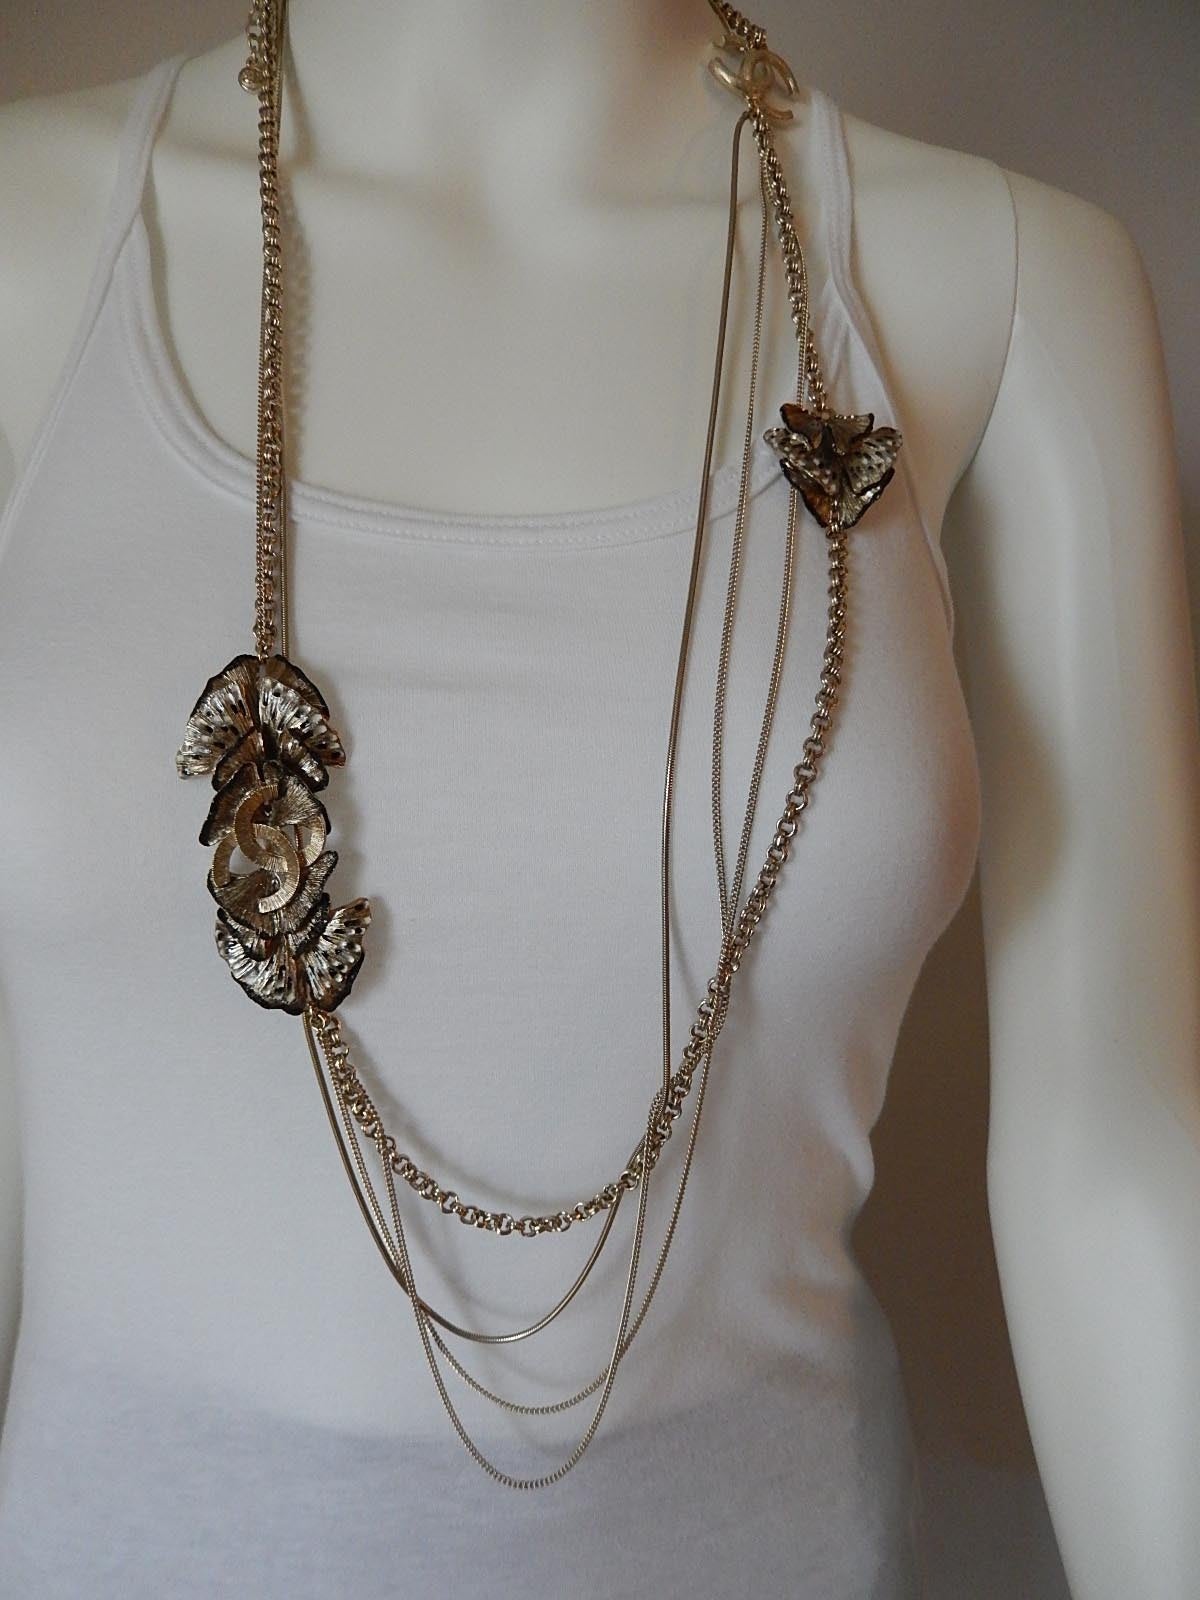 Beautiful, brand new, long multi-chain Chanel Necklace.
Each gold strand is a different link
Gold with some black and white enamel work on the butterflies
CC Large logos on either side
From 11P
Measures 21